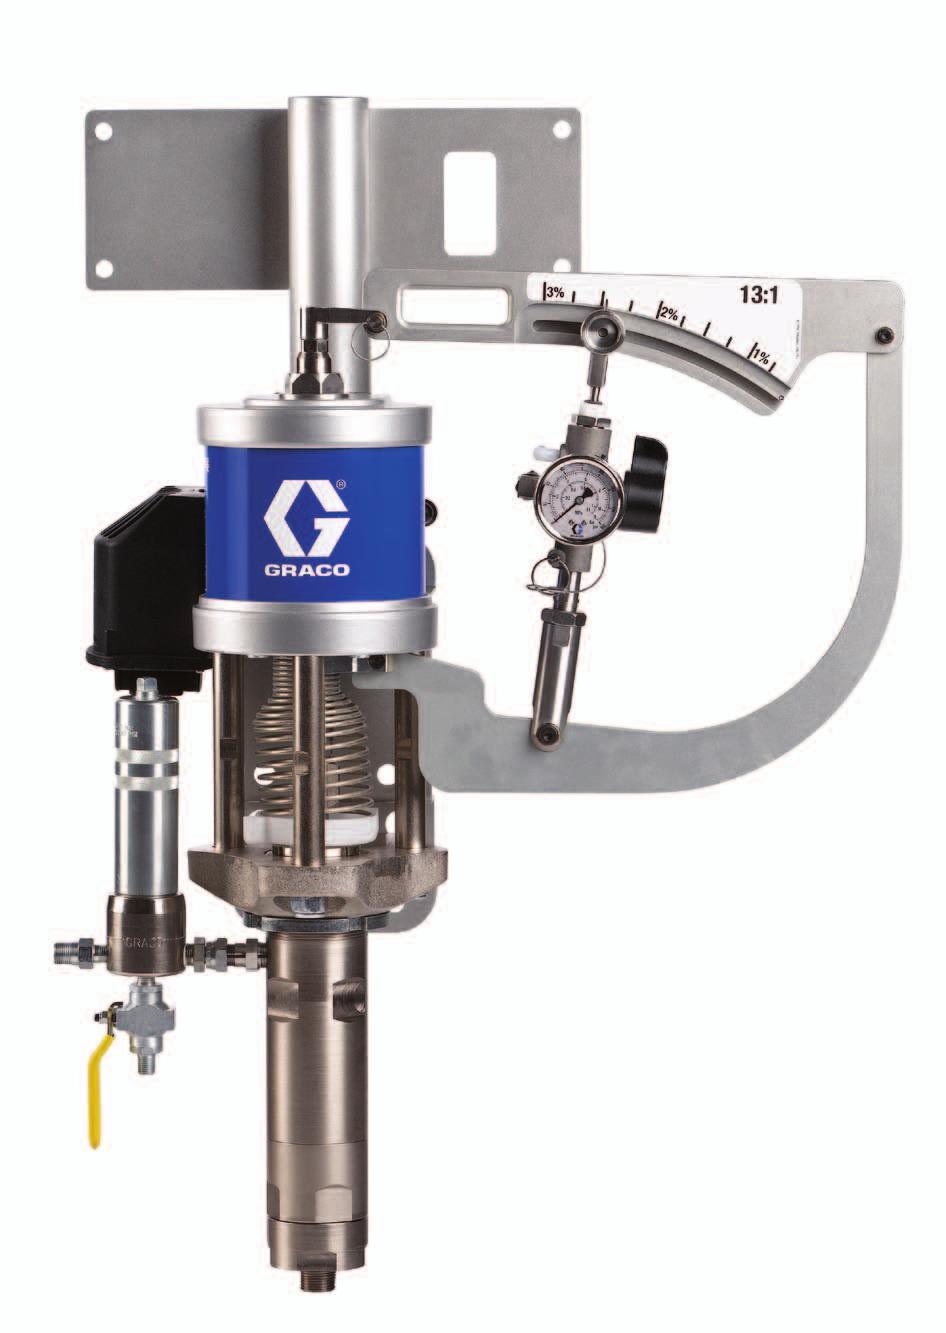 Engineered for superior ratio control Adjustable ratio control Allows quick ratio changes Manual relief valve Easy startup, shut down and maintenance Catalyst gauge Easy-to-read gauge for